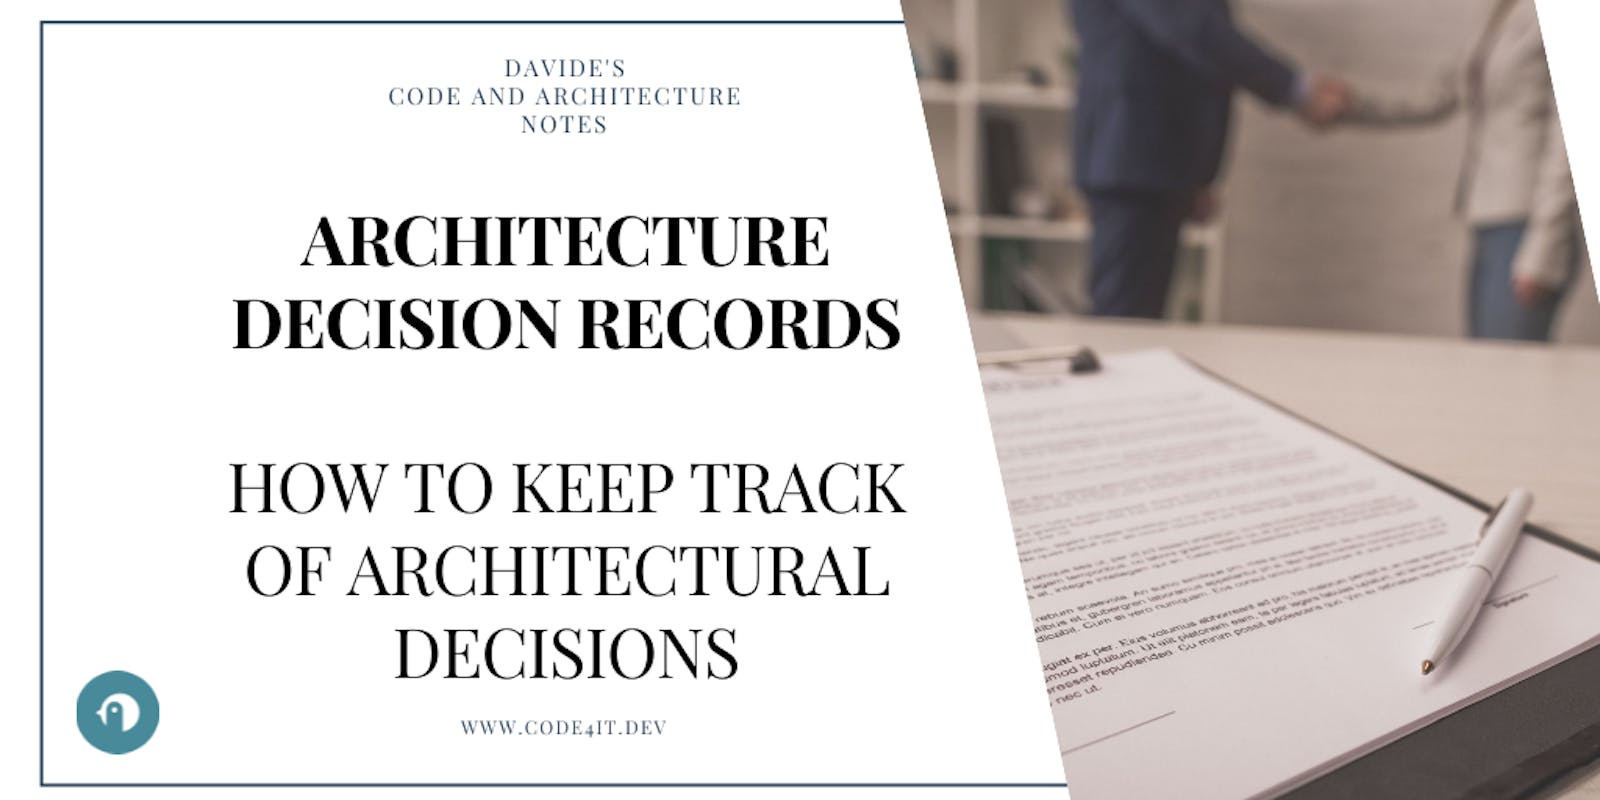 Davide's Code and Architecture Notes - Tracking decision with Architecture Decision Records (ADRs)